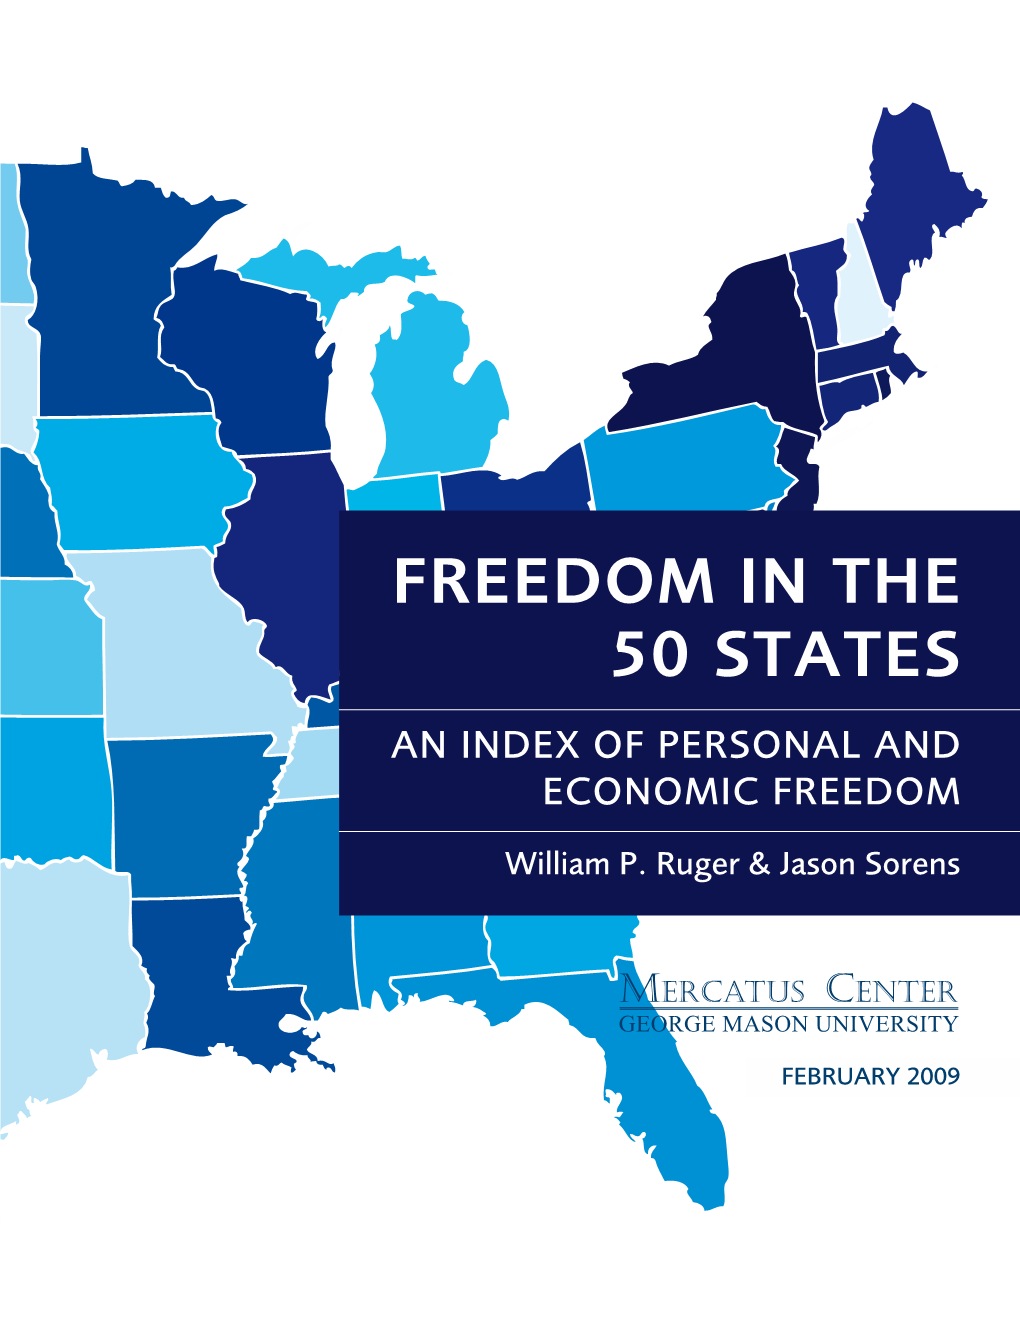 Freedom in the 50 States an Index of Personal and Economic Freedom